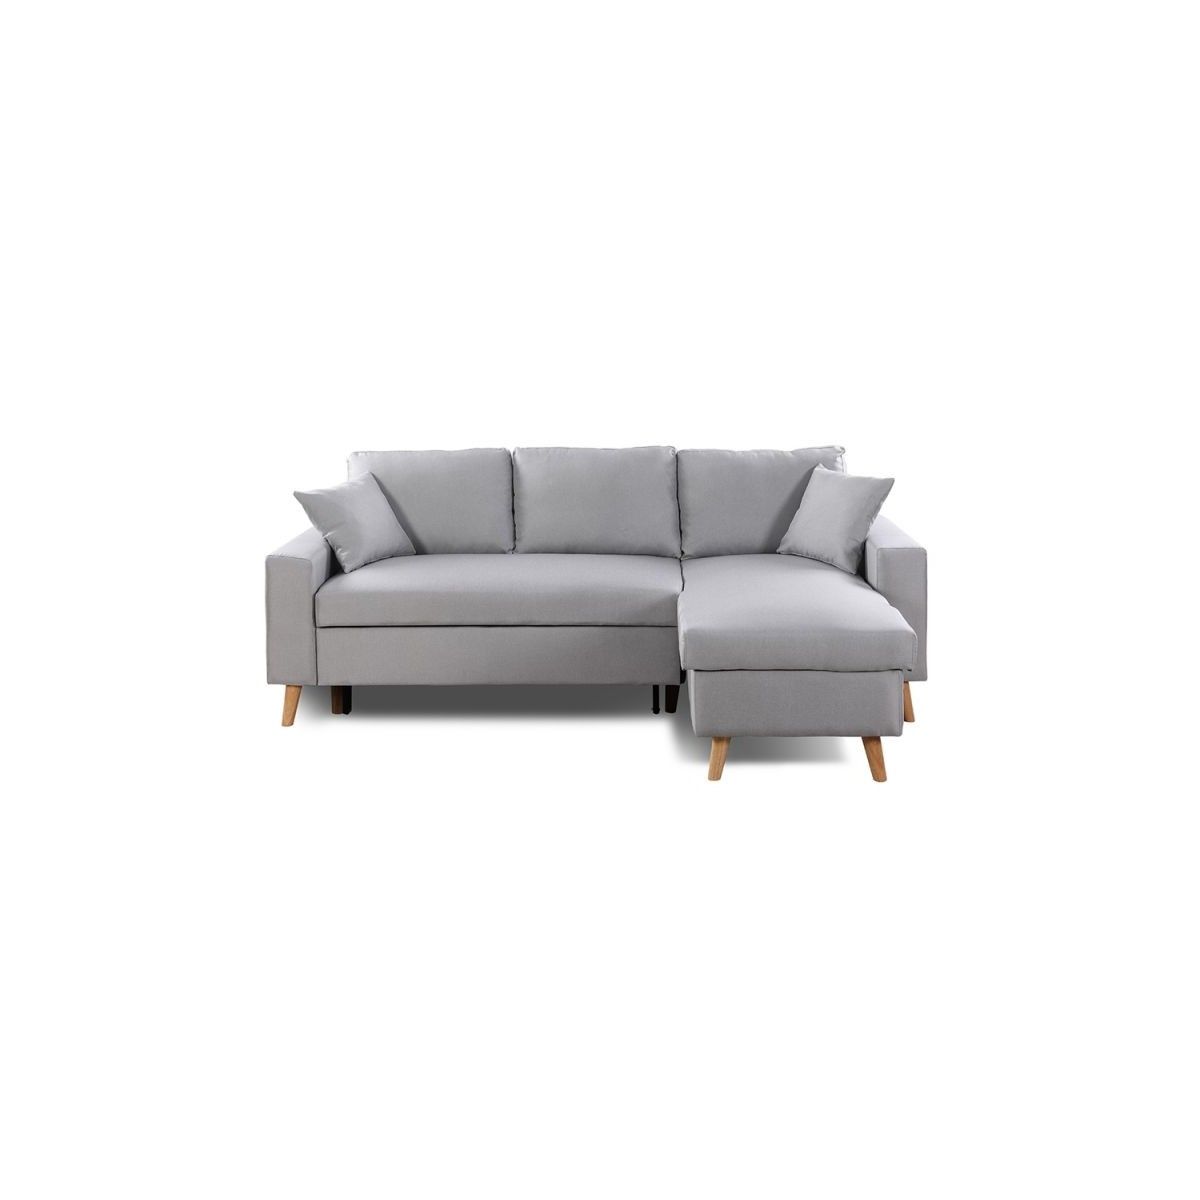 Scandinavian Corner Sofa Convertible 4 Places Fabric Chovin (light Grey) Pertaining To Convertible Light Gray Chair Beds (View 4 of 15)